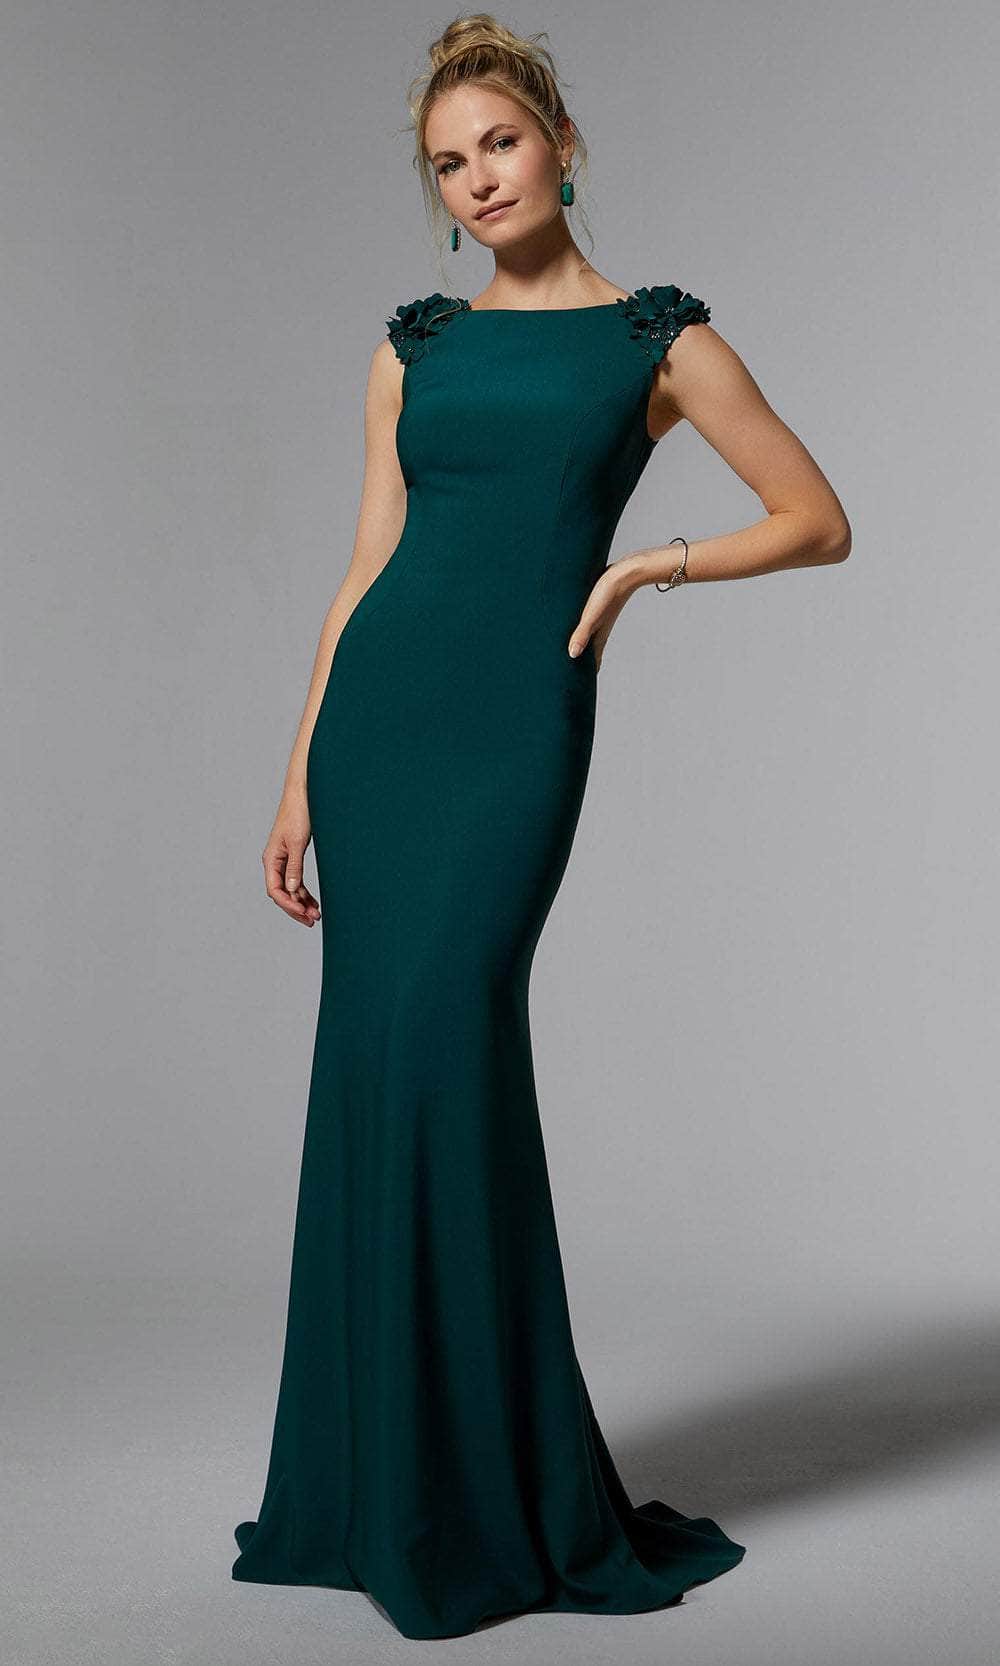 Image of MGNY By Mori Lee 72920 - Applique Cap Sleeve Evening Dress